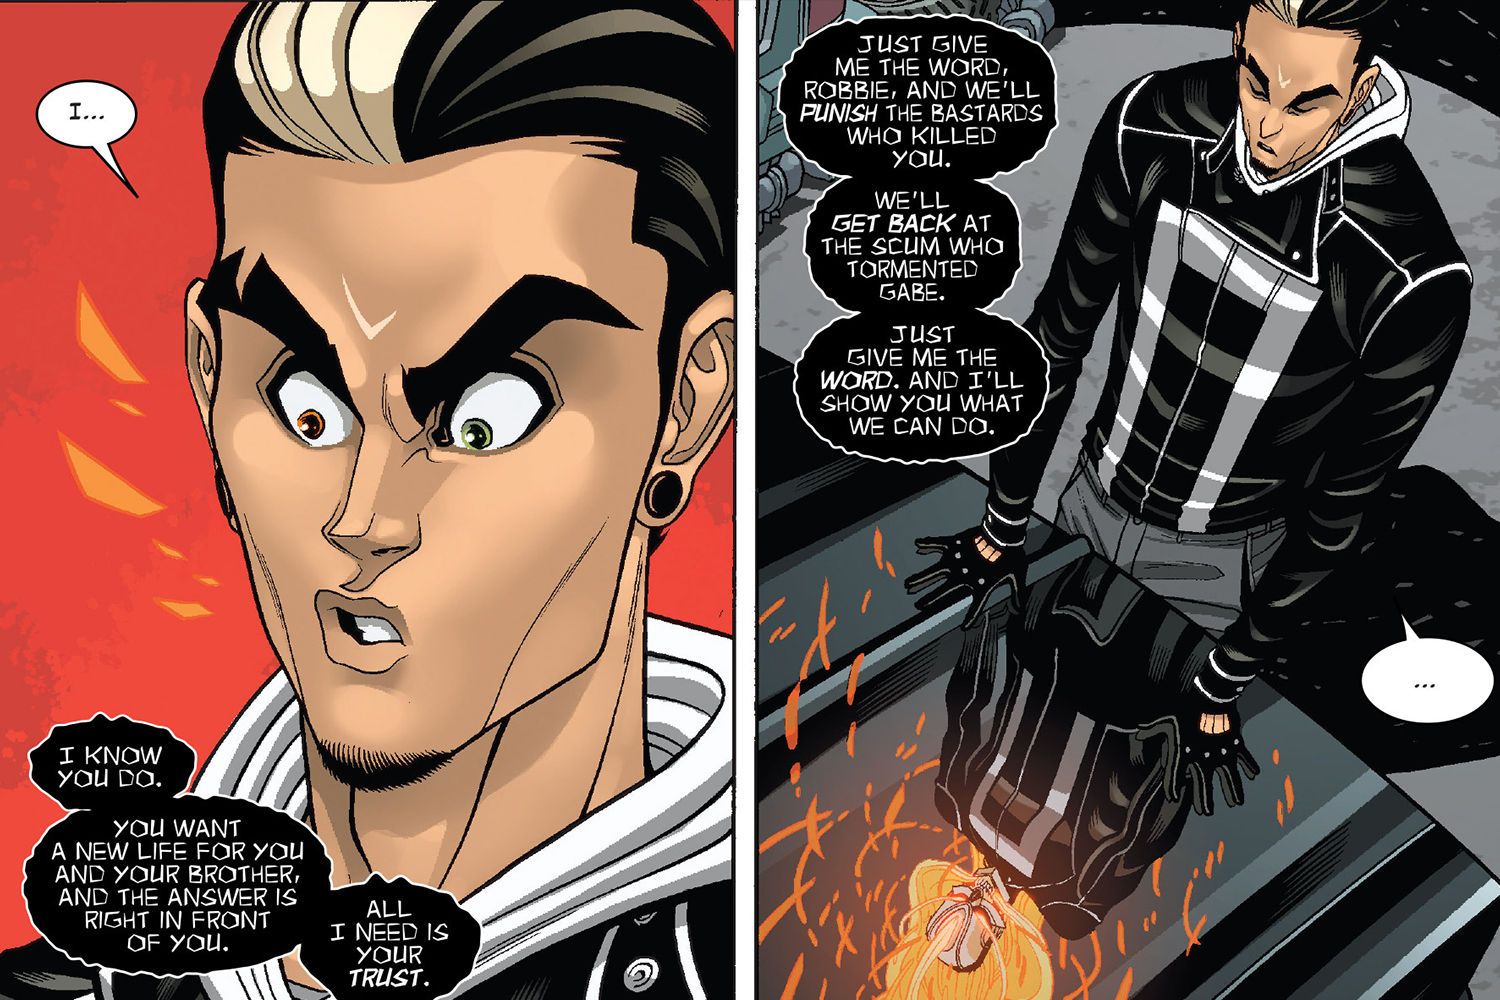 Robbie Reyes becomes the Ghost Rider